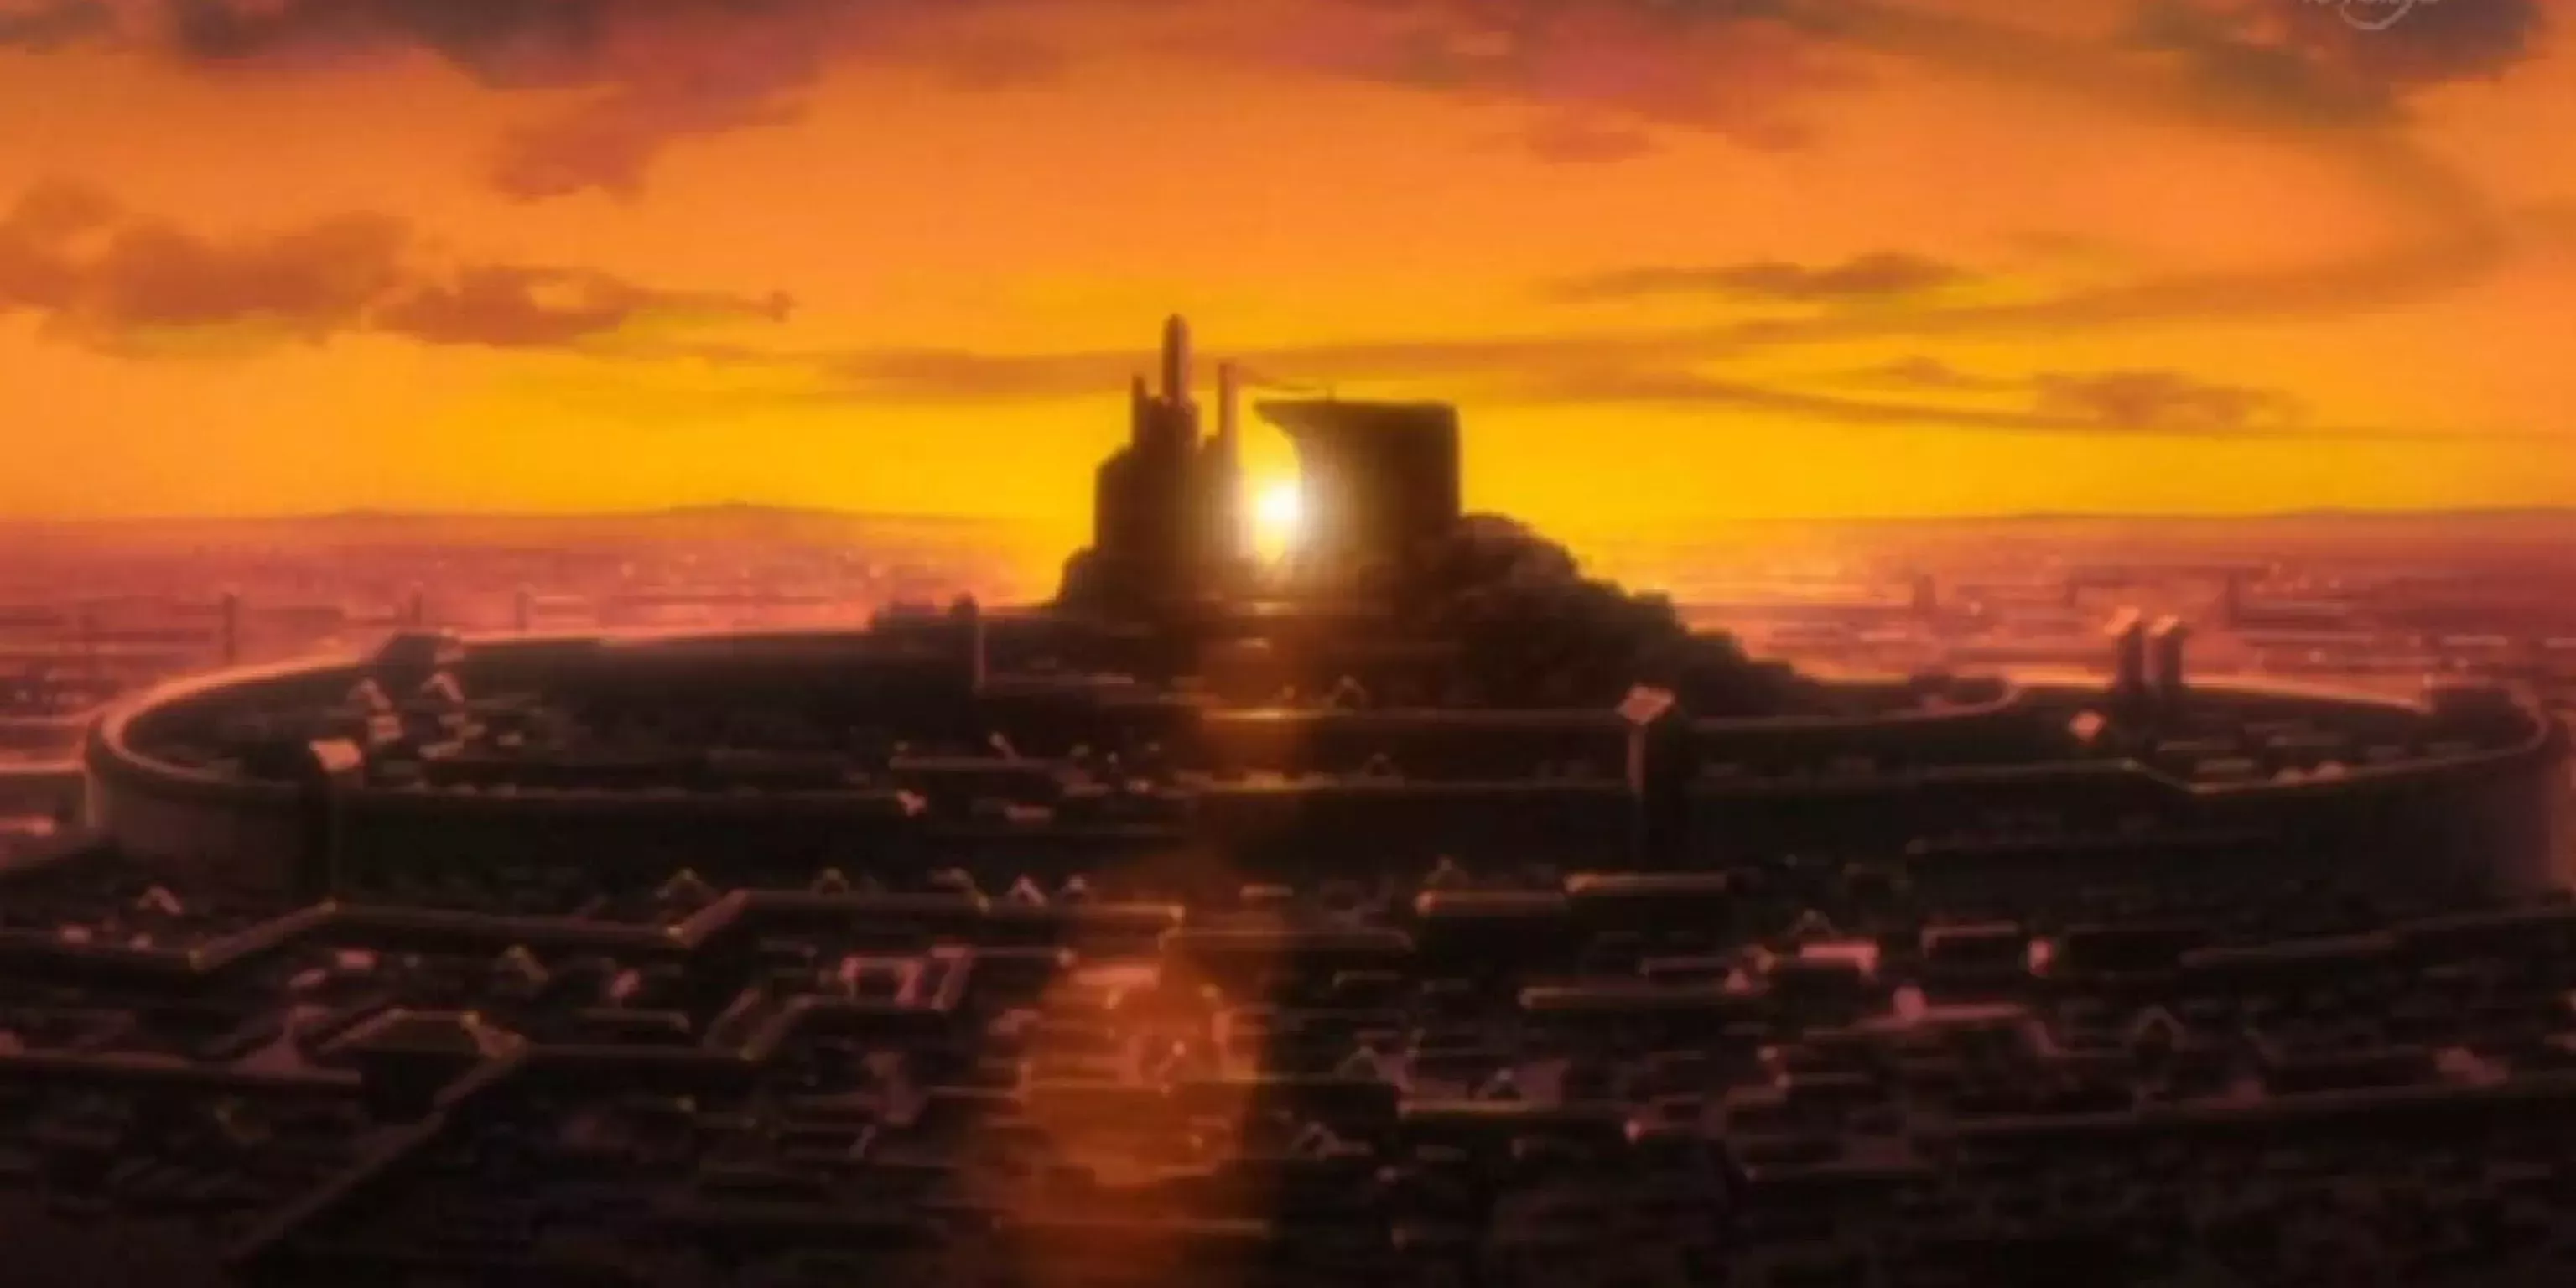 The Soul Society during a sunset in Bleach